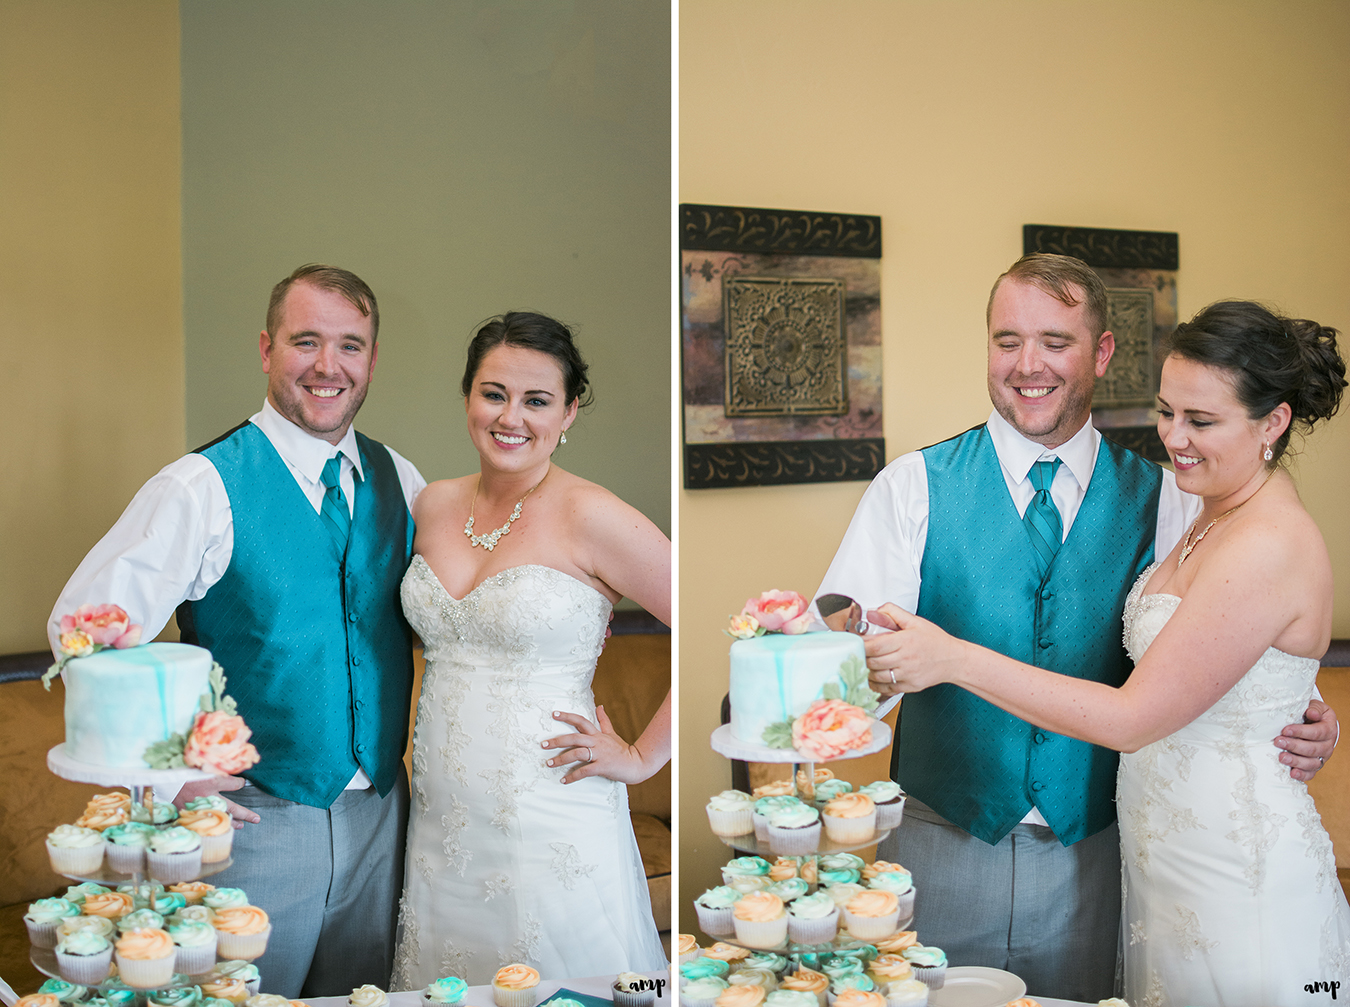 Bride and groom cutting the marbled cake